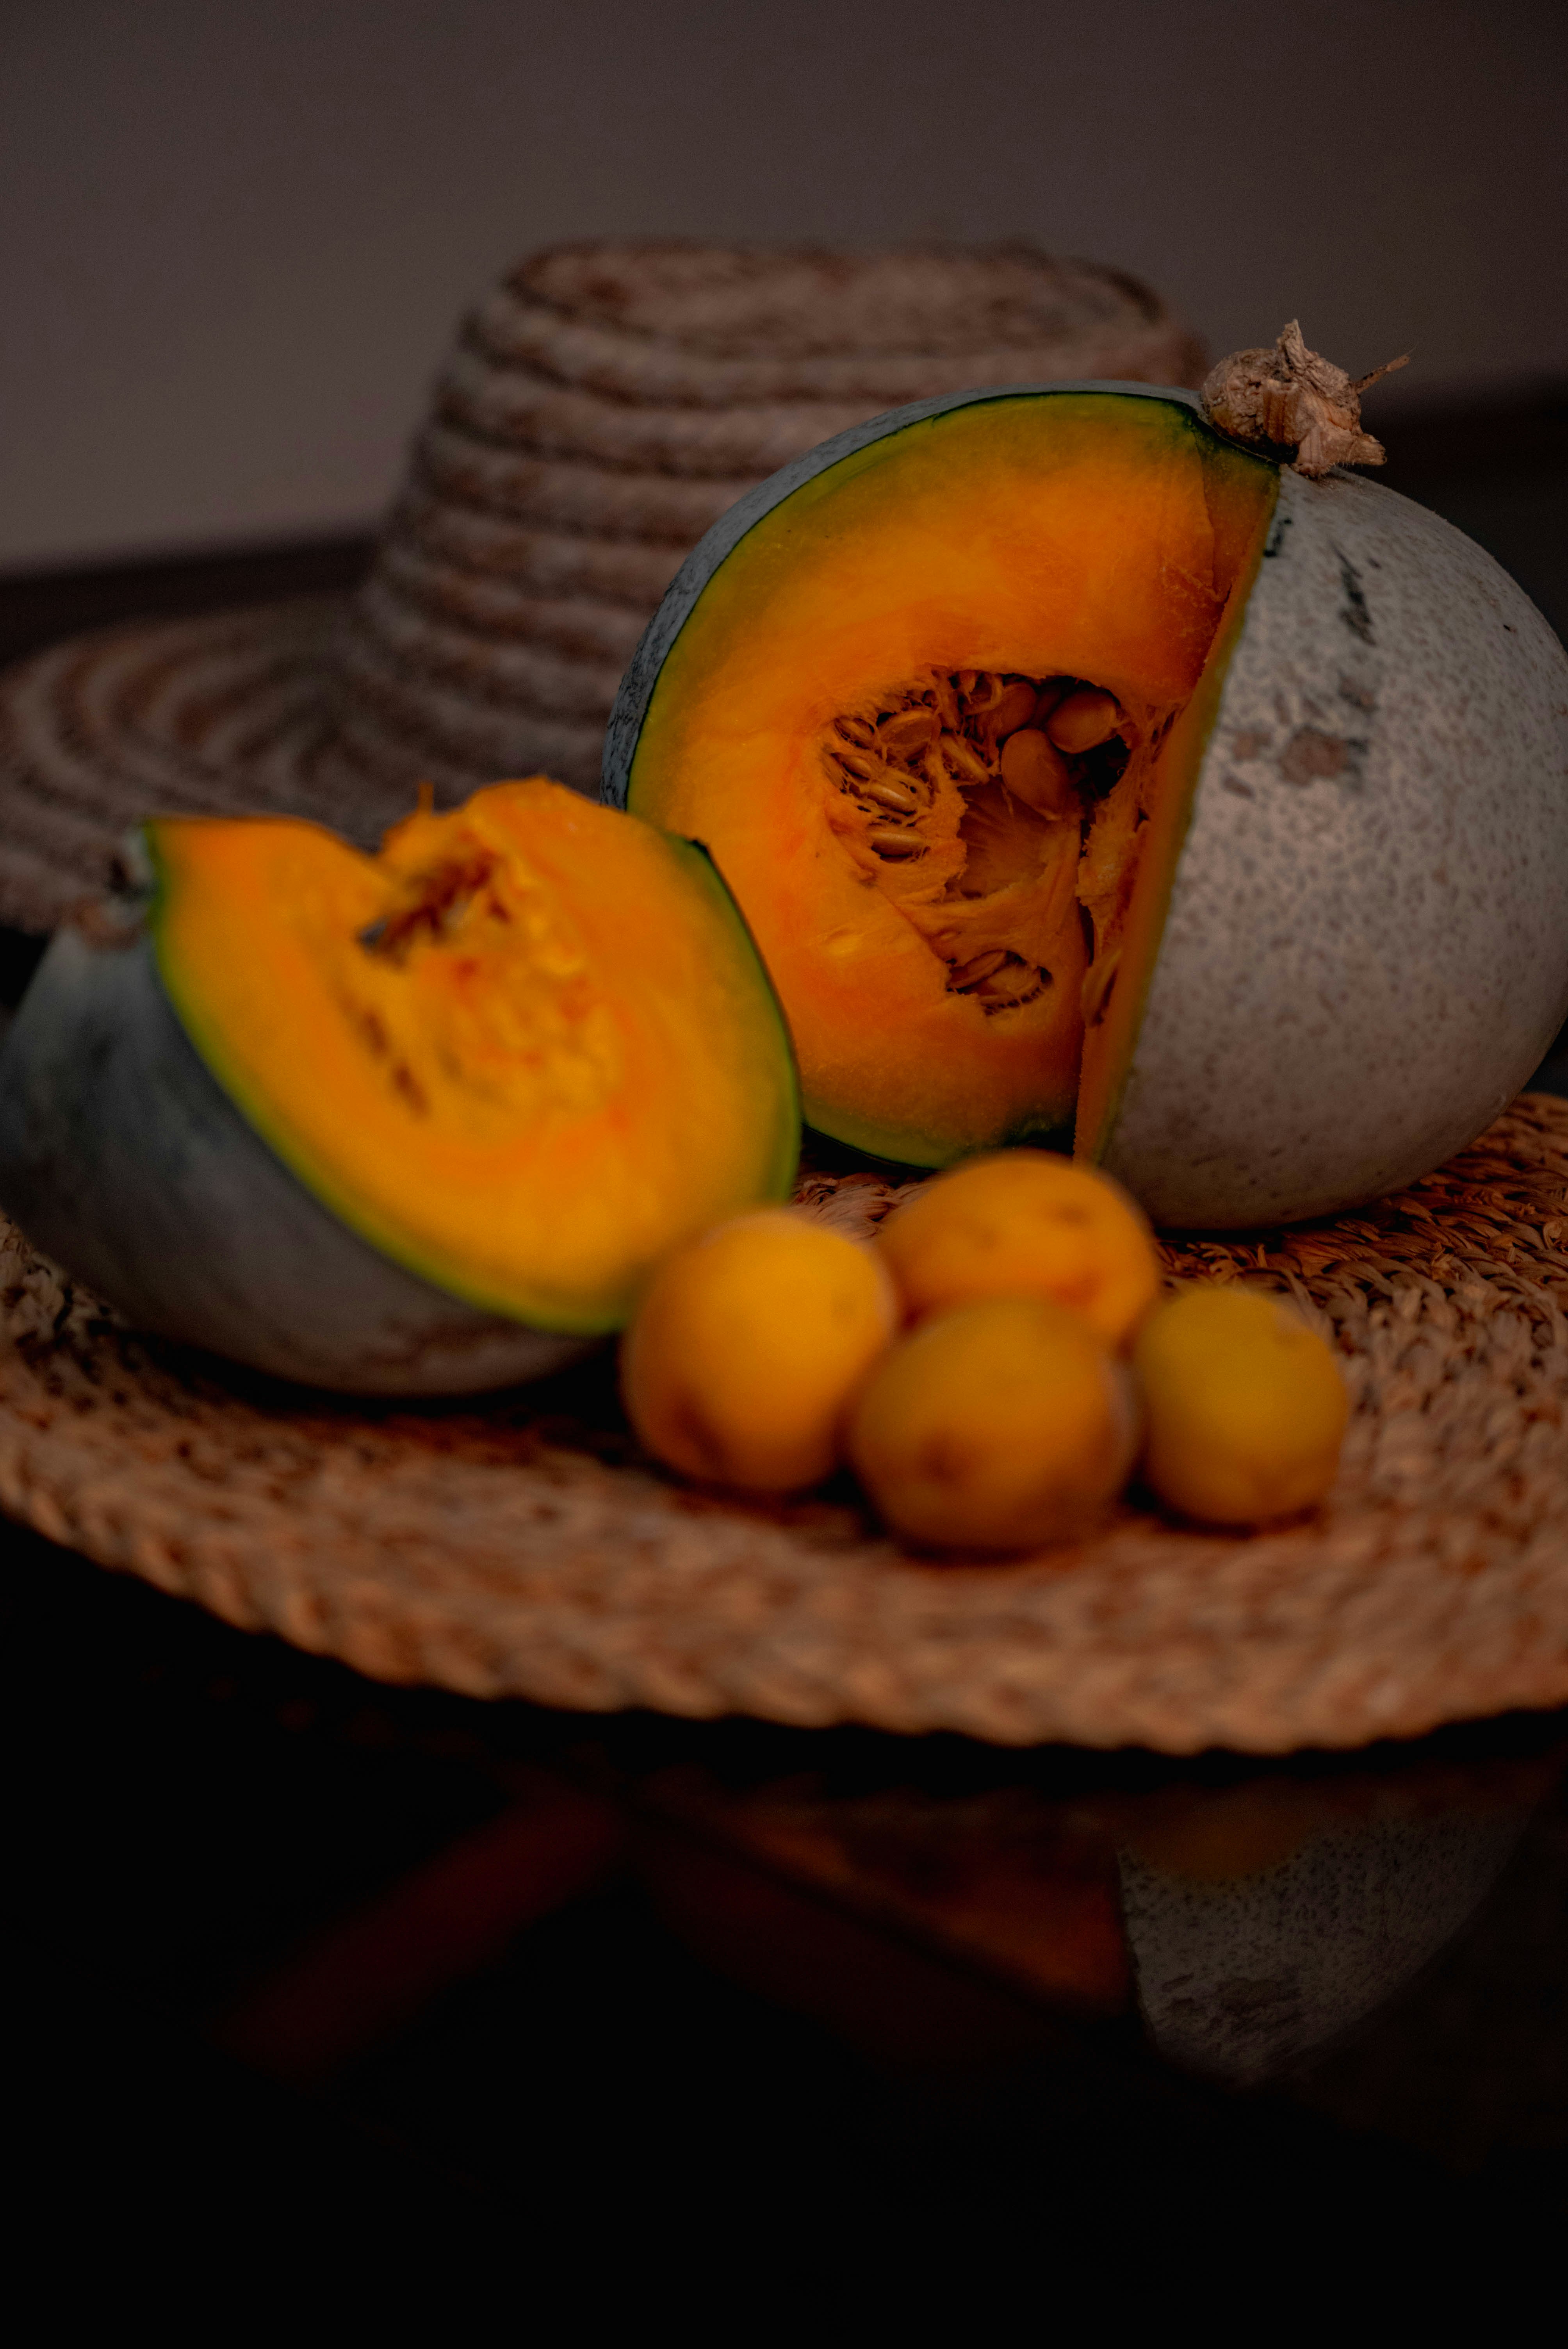 sliced watermelon and orange fruits on brown woven round basket